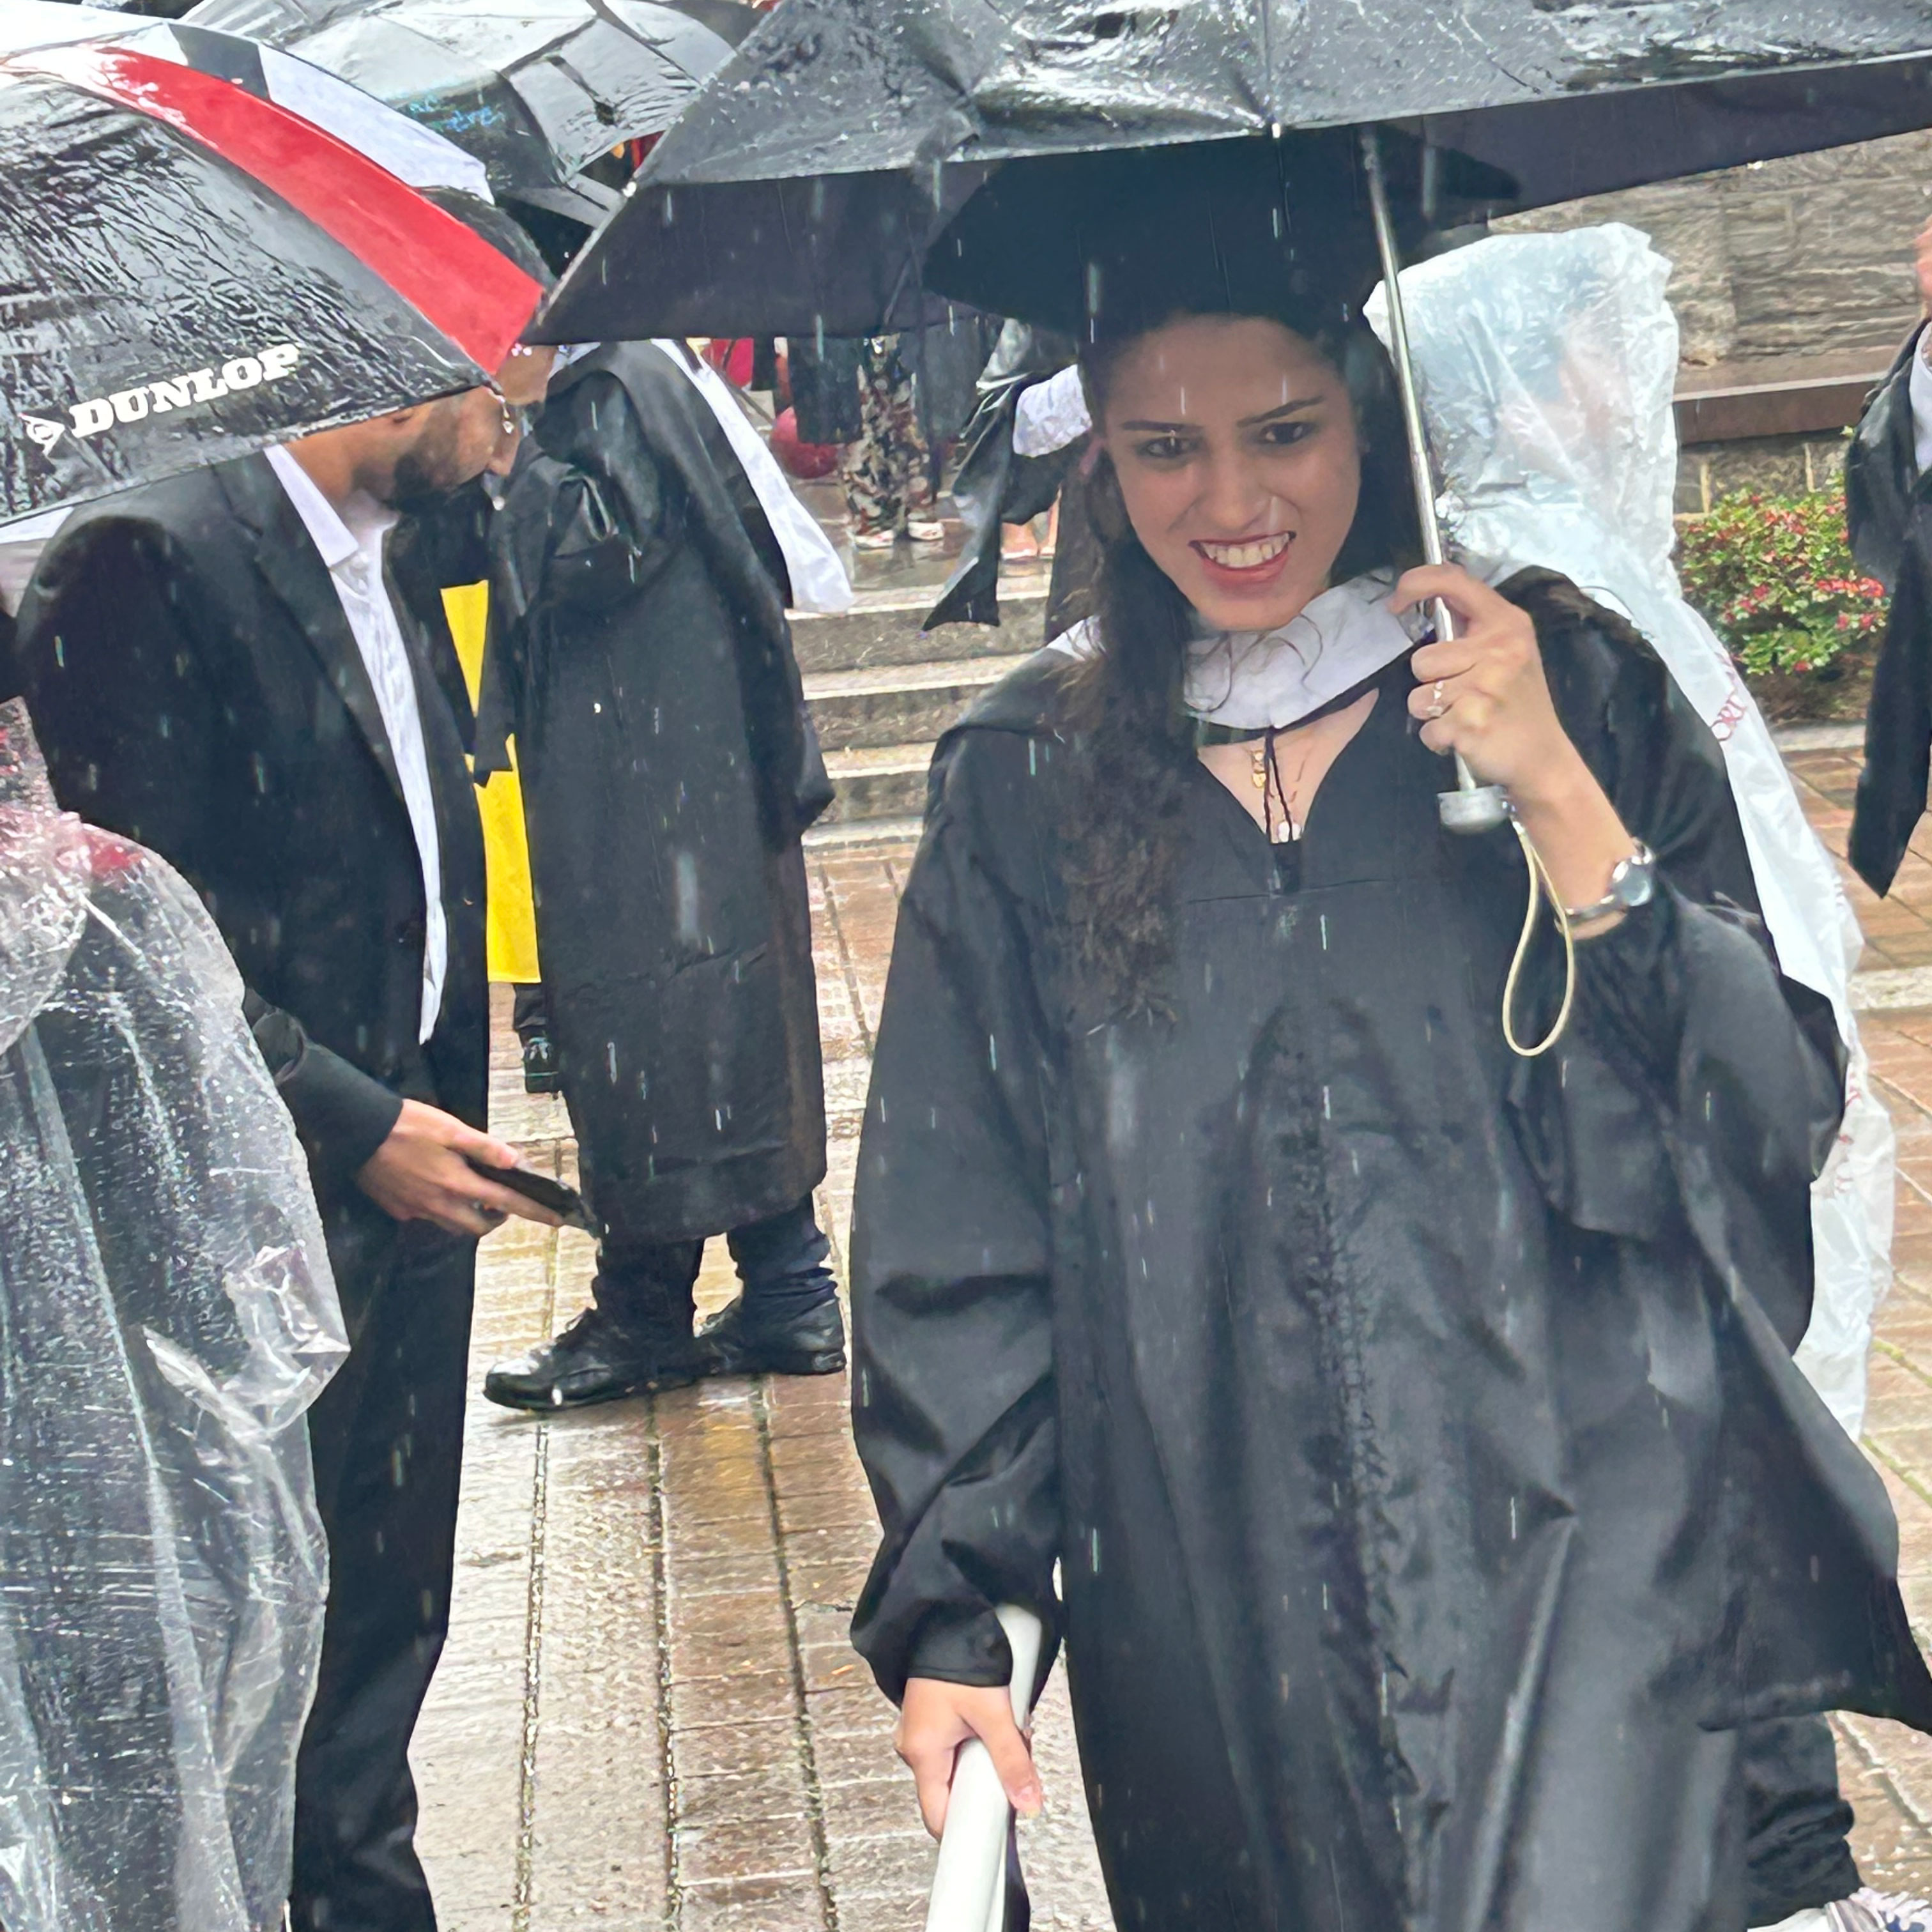 Nisa Khurram Hafeez at Commencement with umbrella in the rain